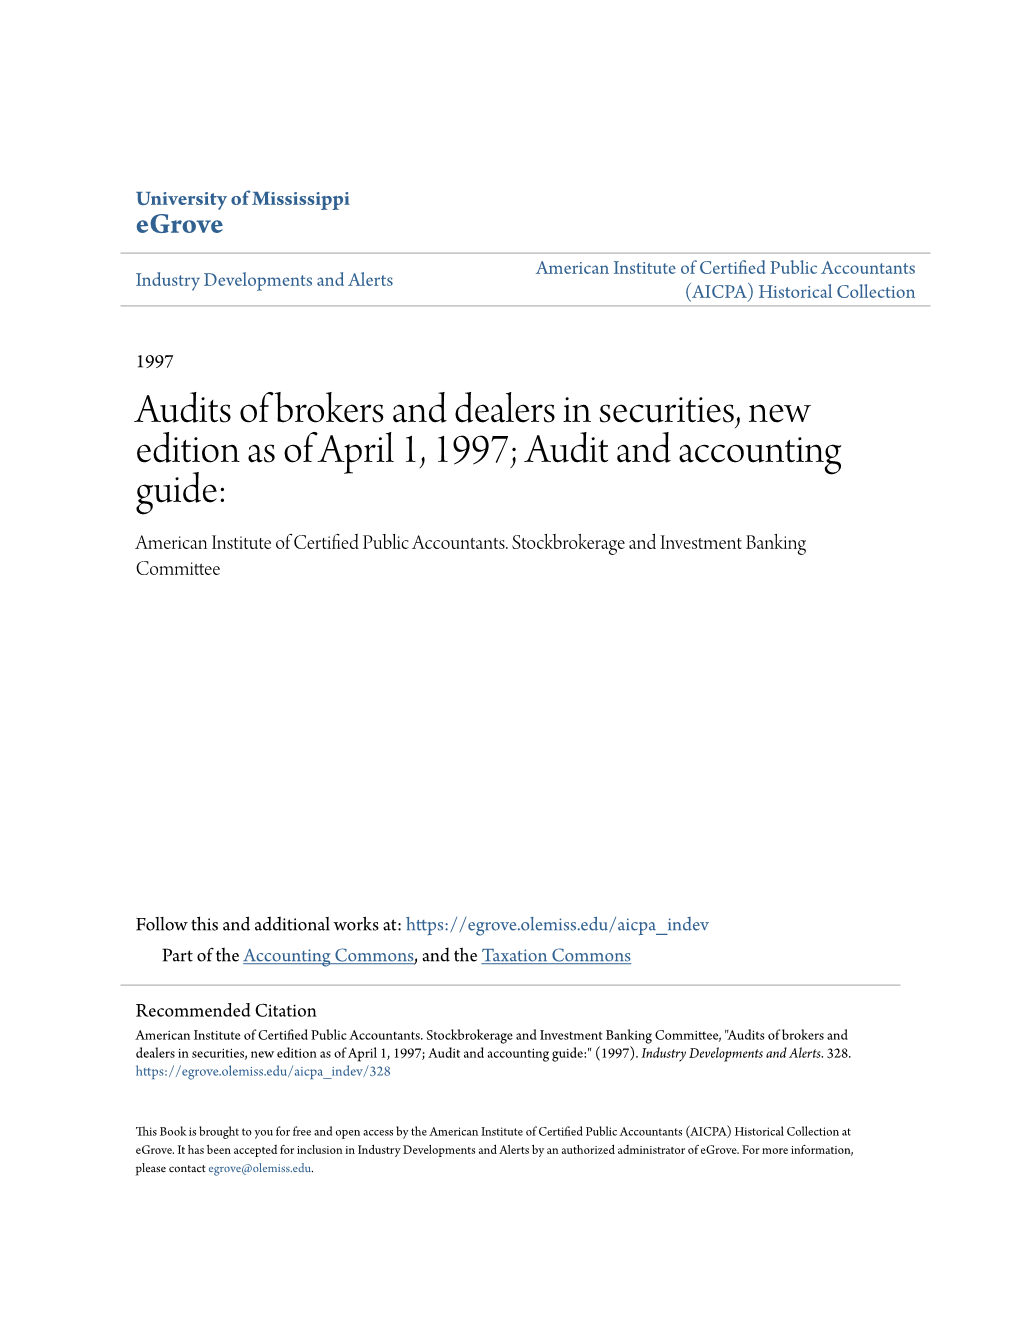 Audits of Brokers and Dealers in Securities, New Edition As of April 1, 1997; Audit and Accounting Guide: American Institute of Certified Public Accountants